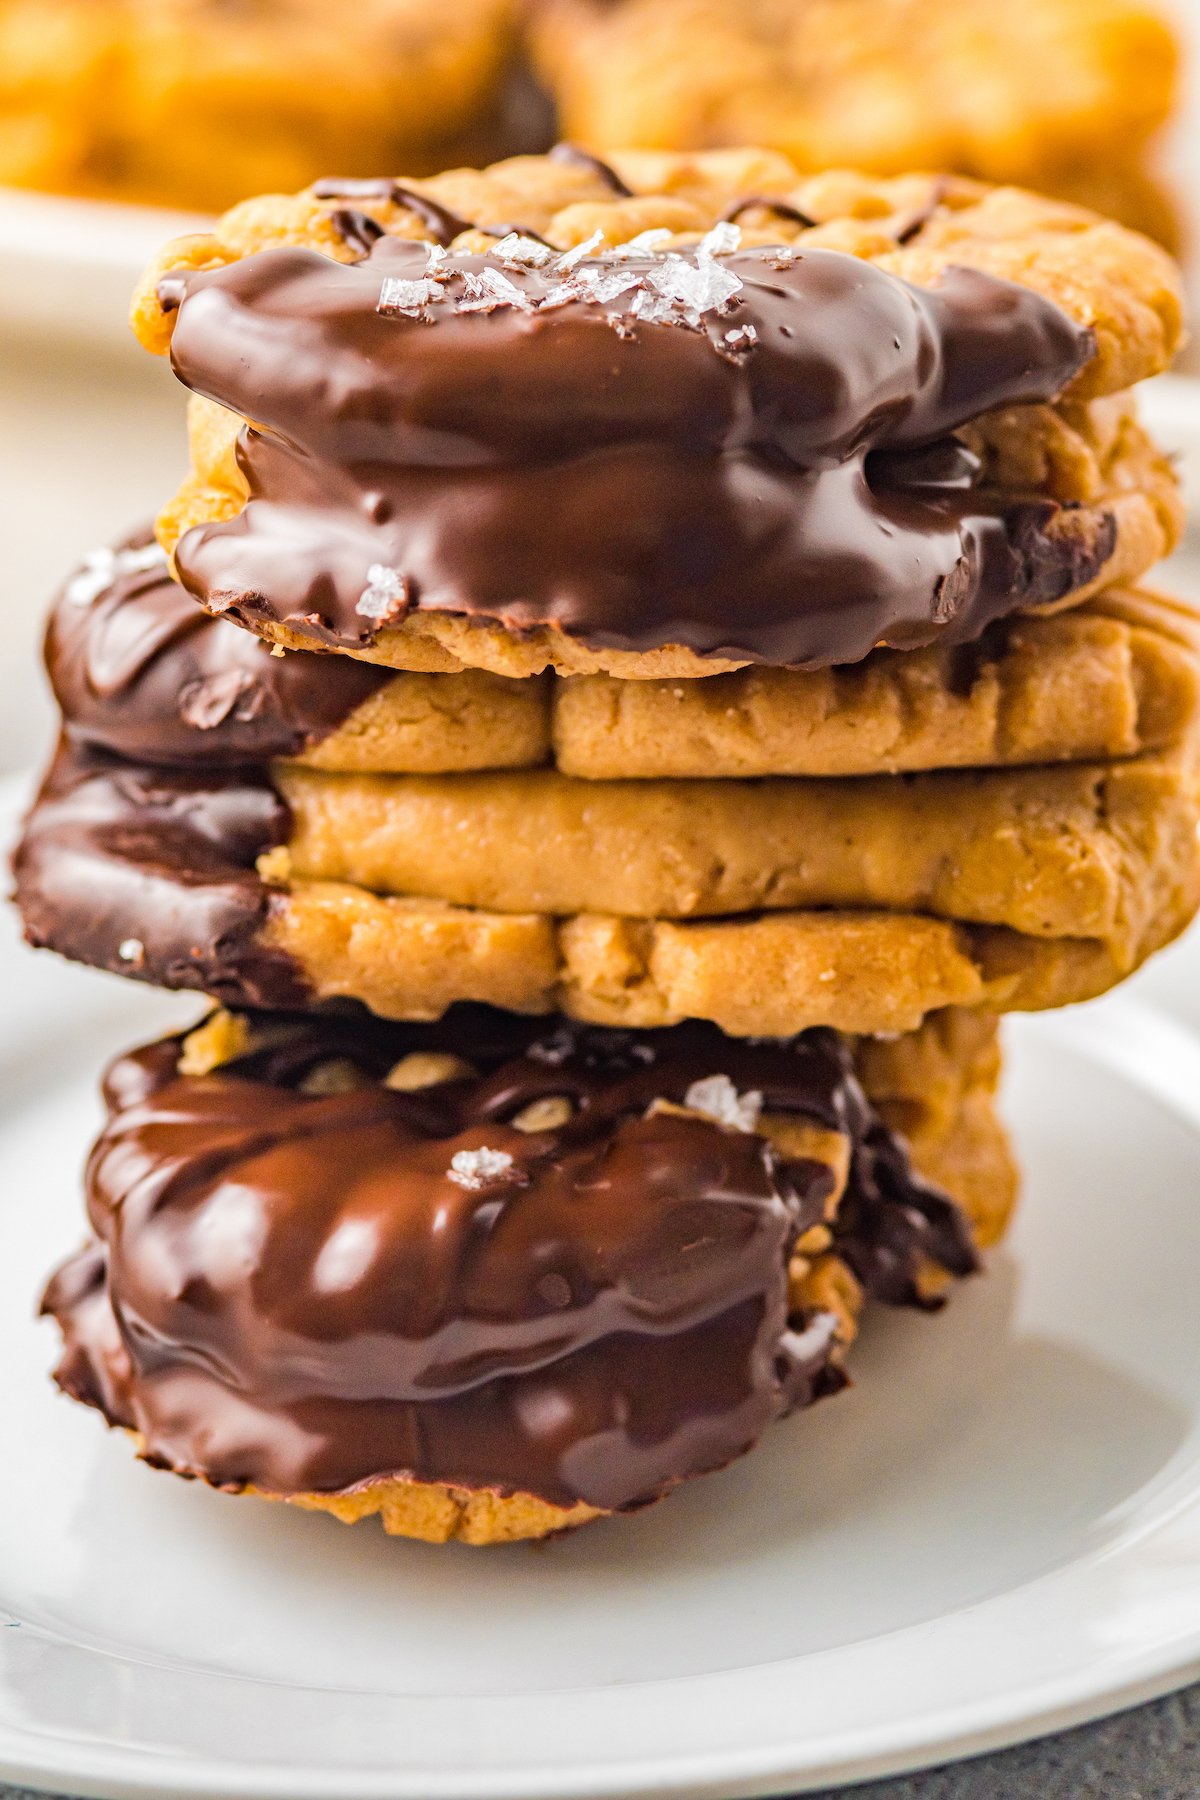 Three chocolate dipped Nutter Butter sandwich cookies, stacked on top of each other.